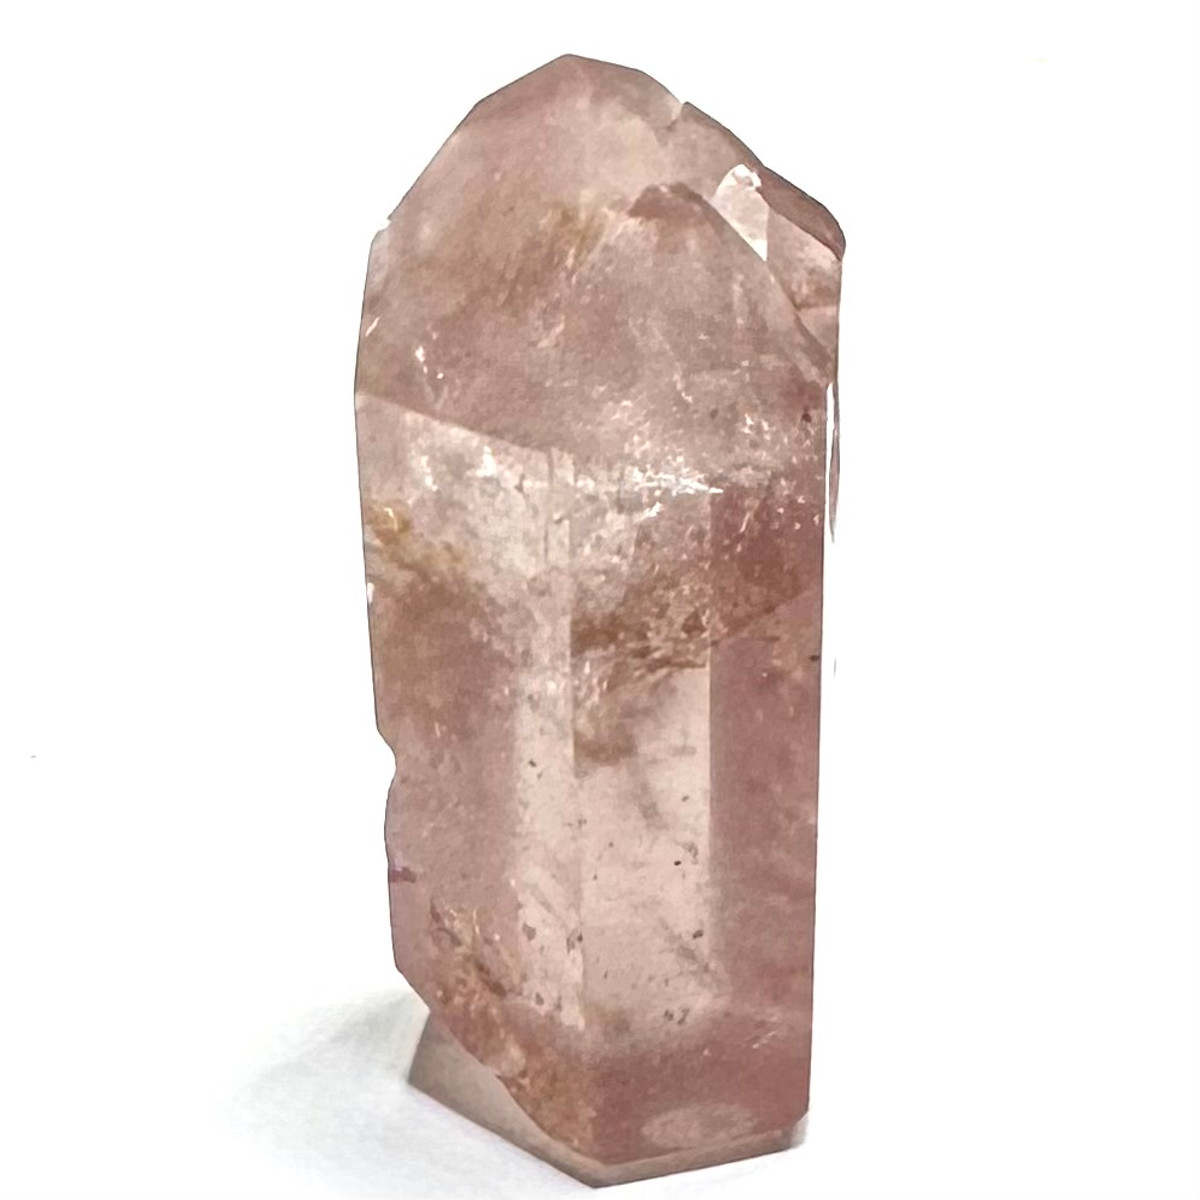 One of a Kind Pink Lithium Quartz with Rainbow Inclusions Double Terminated Mini Stone Tower-2 x 3/4"